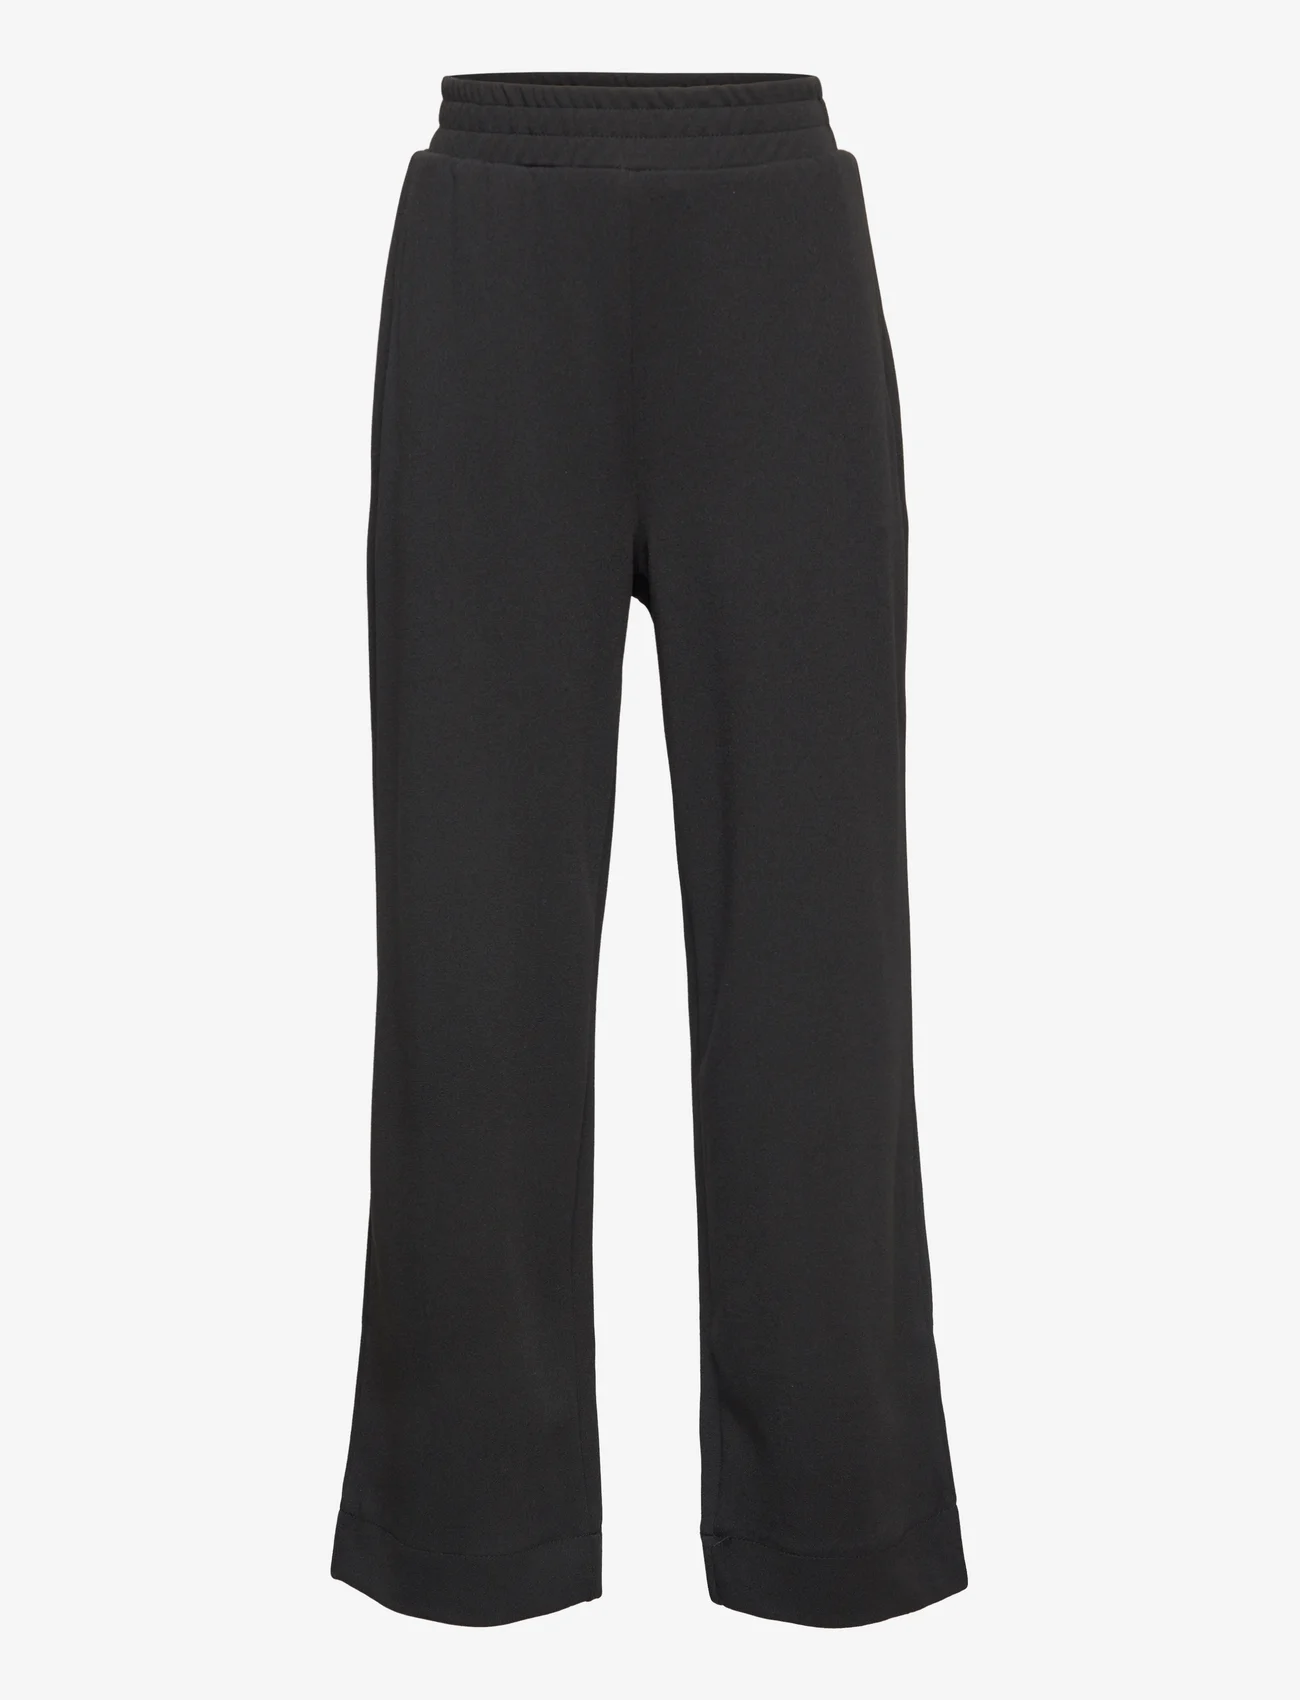 Sofie Schnoor Young - Trousers - black - 0